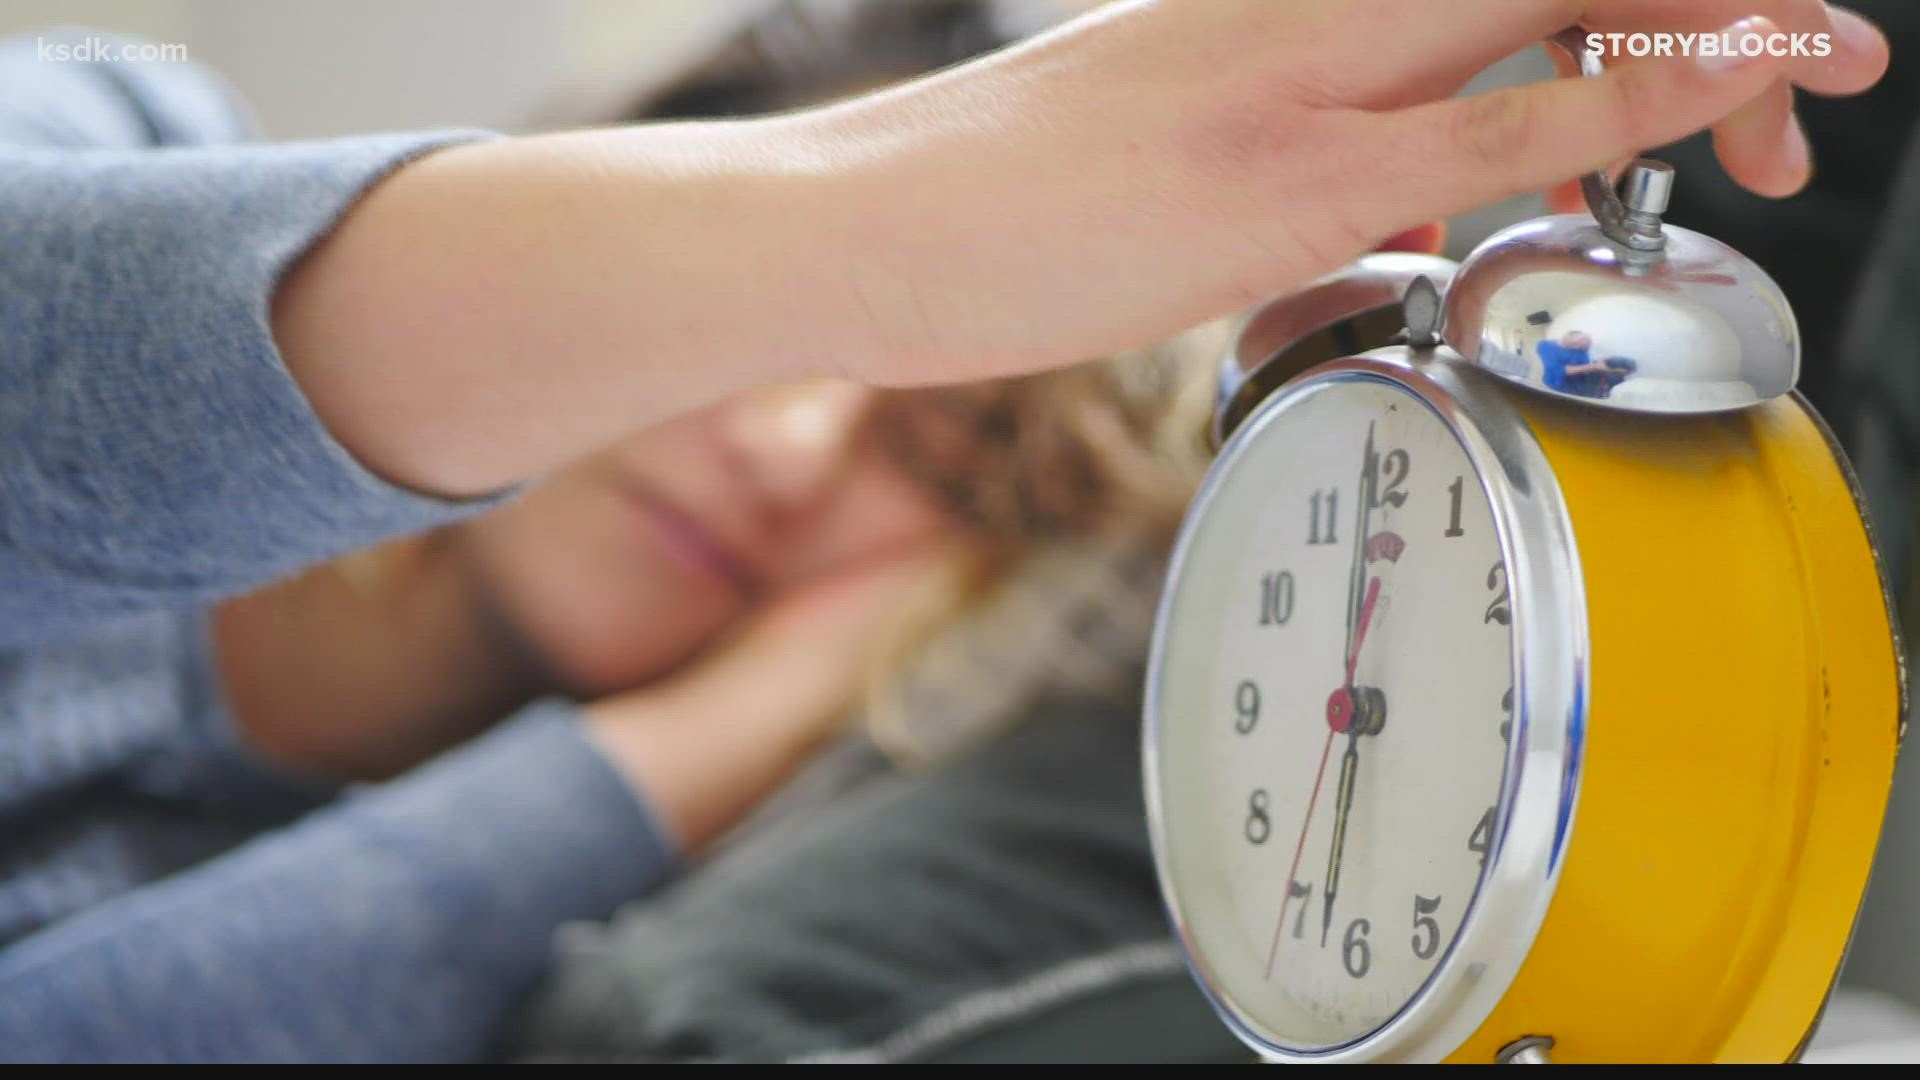 One sleep scientist says doing away with daylight saving time would be good for overall health.